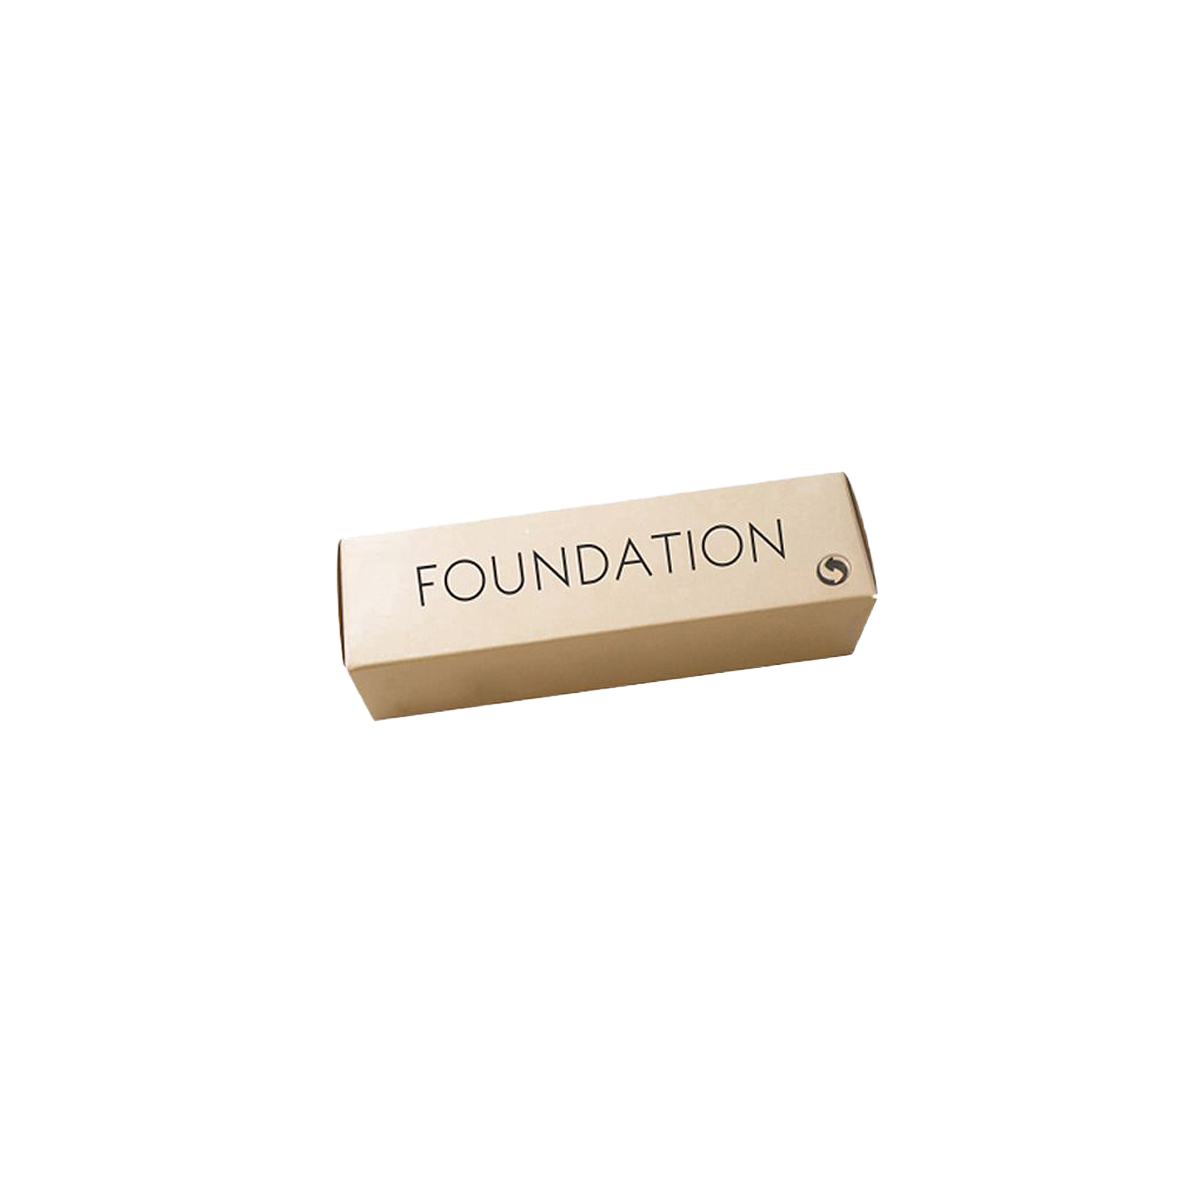 Custom Foundation Boxes and Packaging